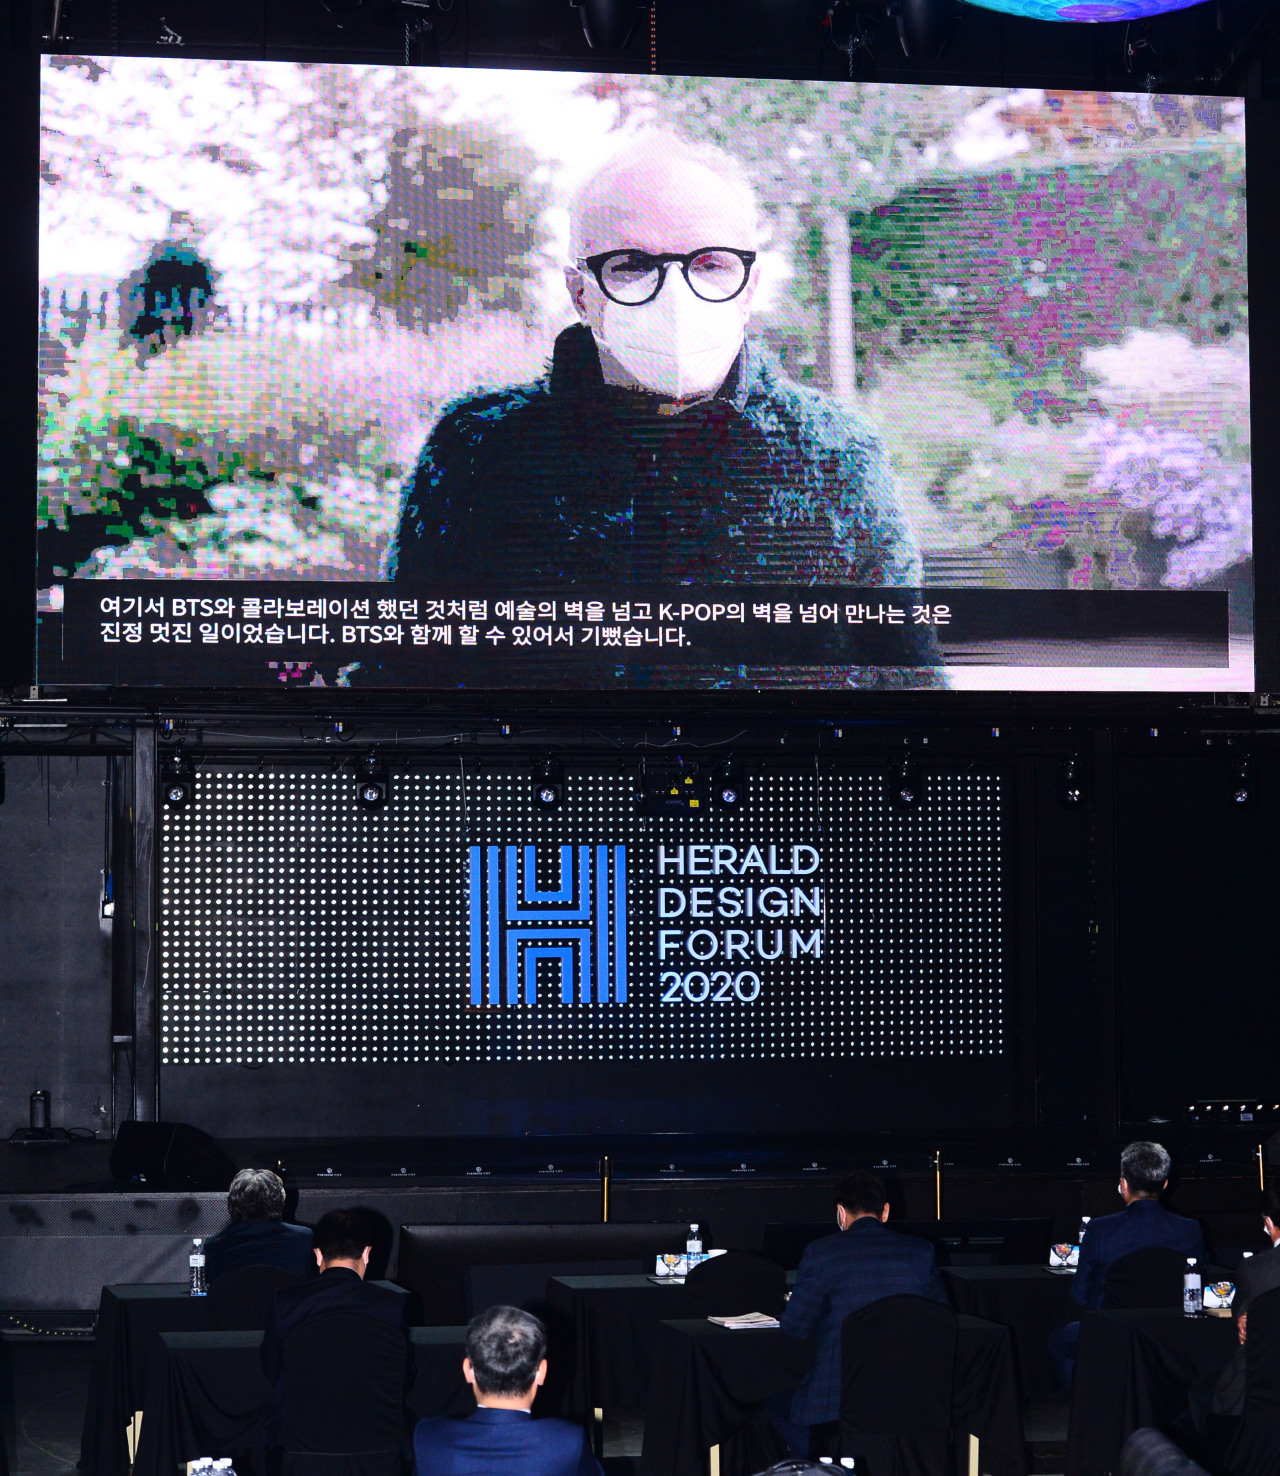 Hans Ulrich Obrist gives an online lecture at the Herald Design Forum 2020 in Incheon on Thursday. (Park Hae-mook/The Korea Herald)